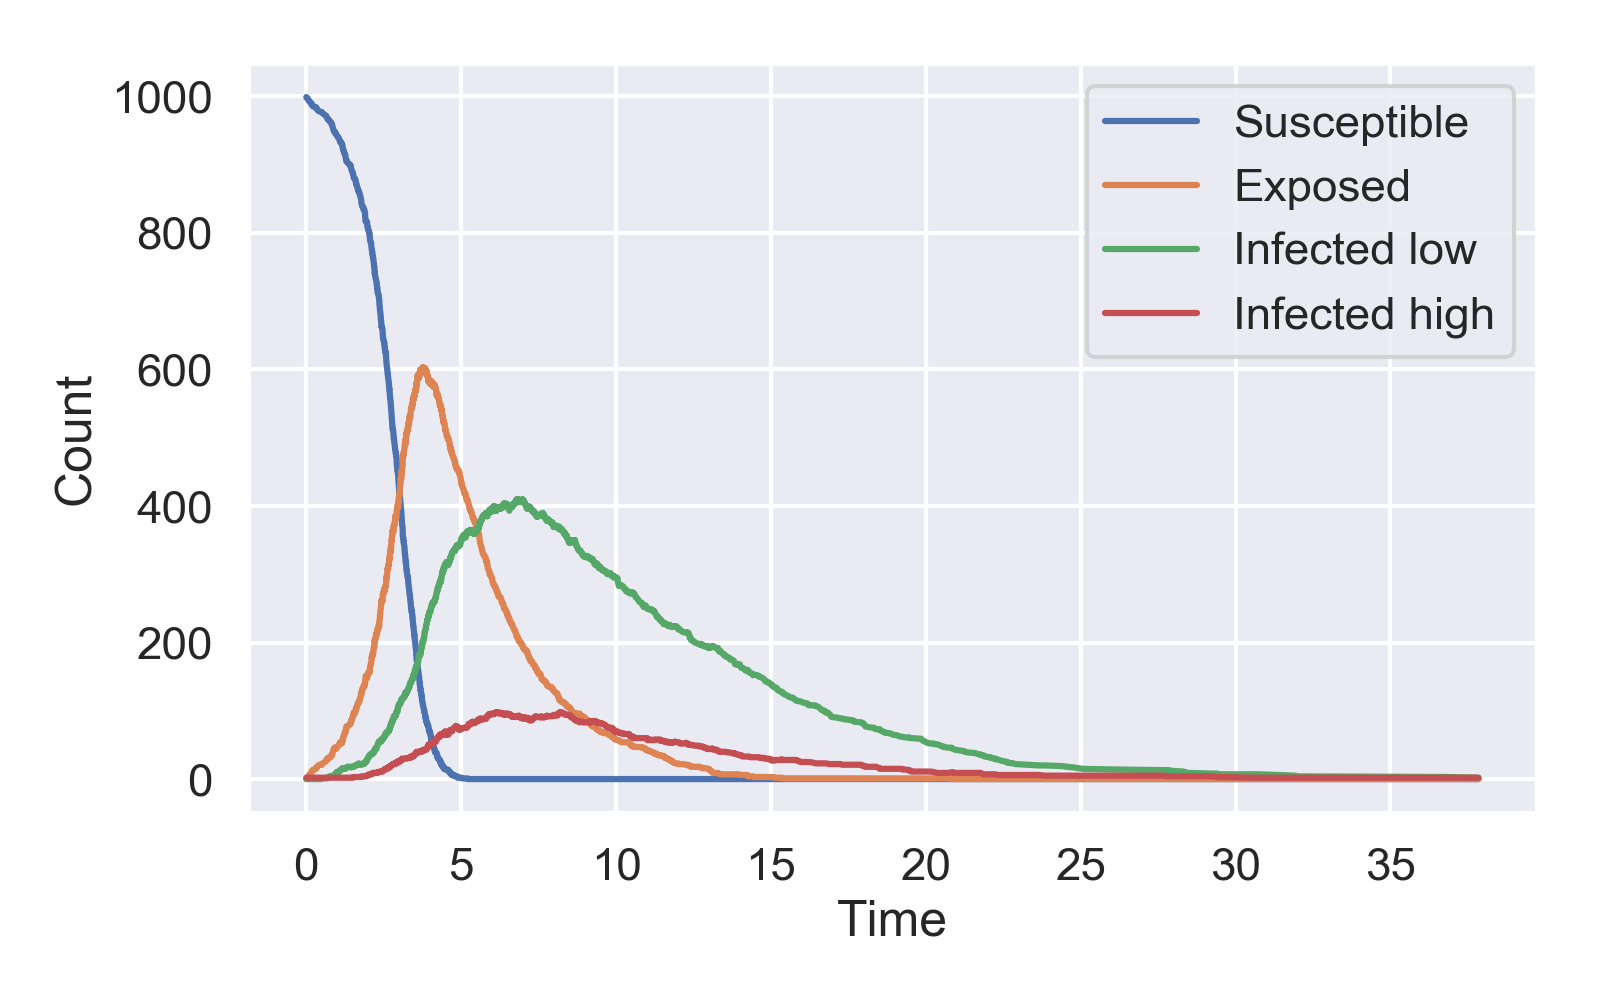 The simulated SEIR curves with high and low risk infections